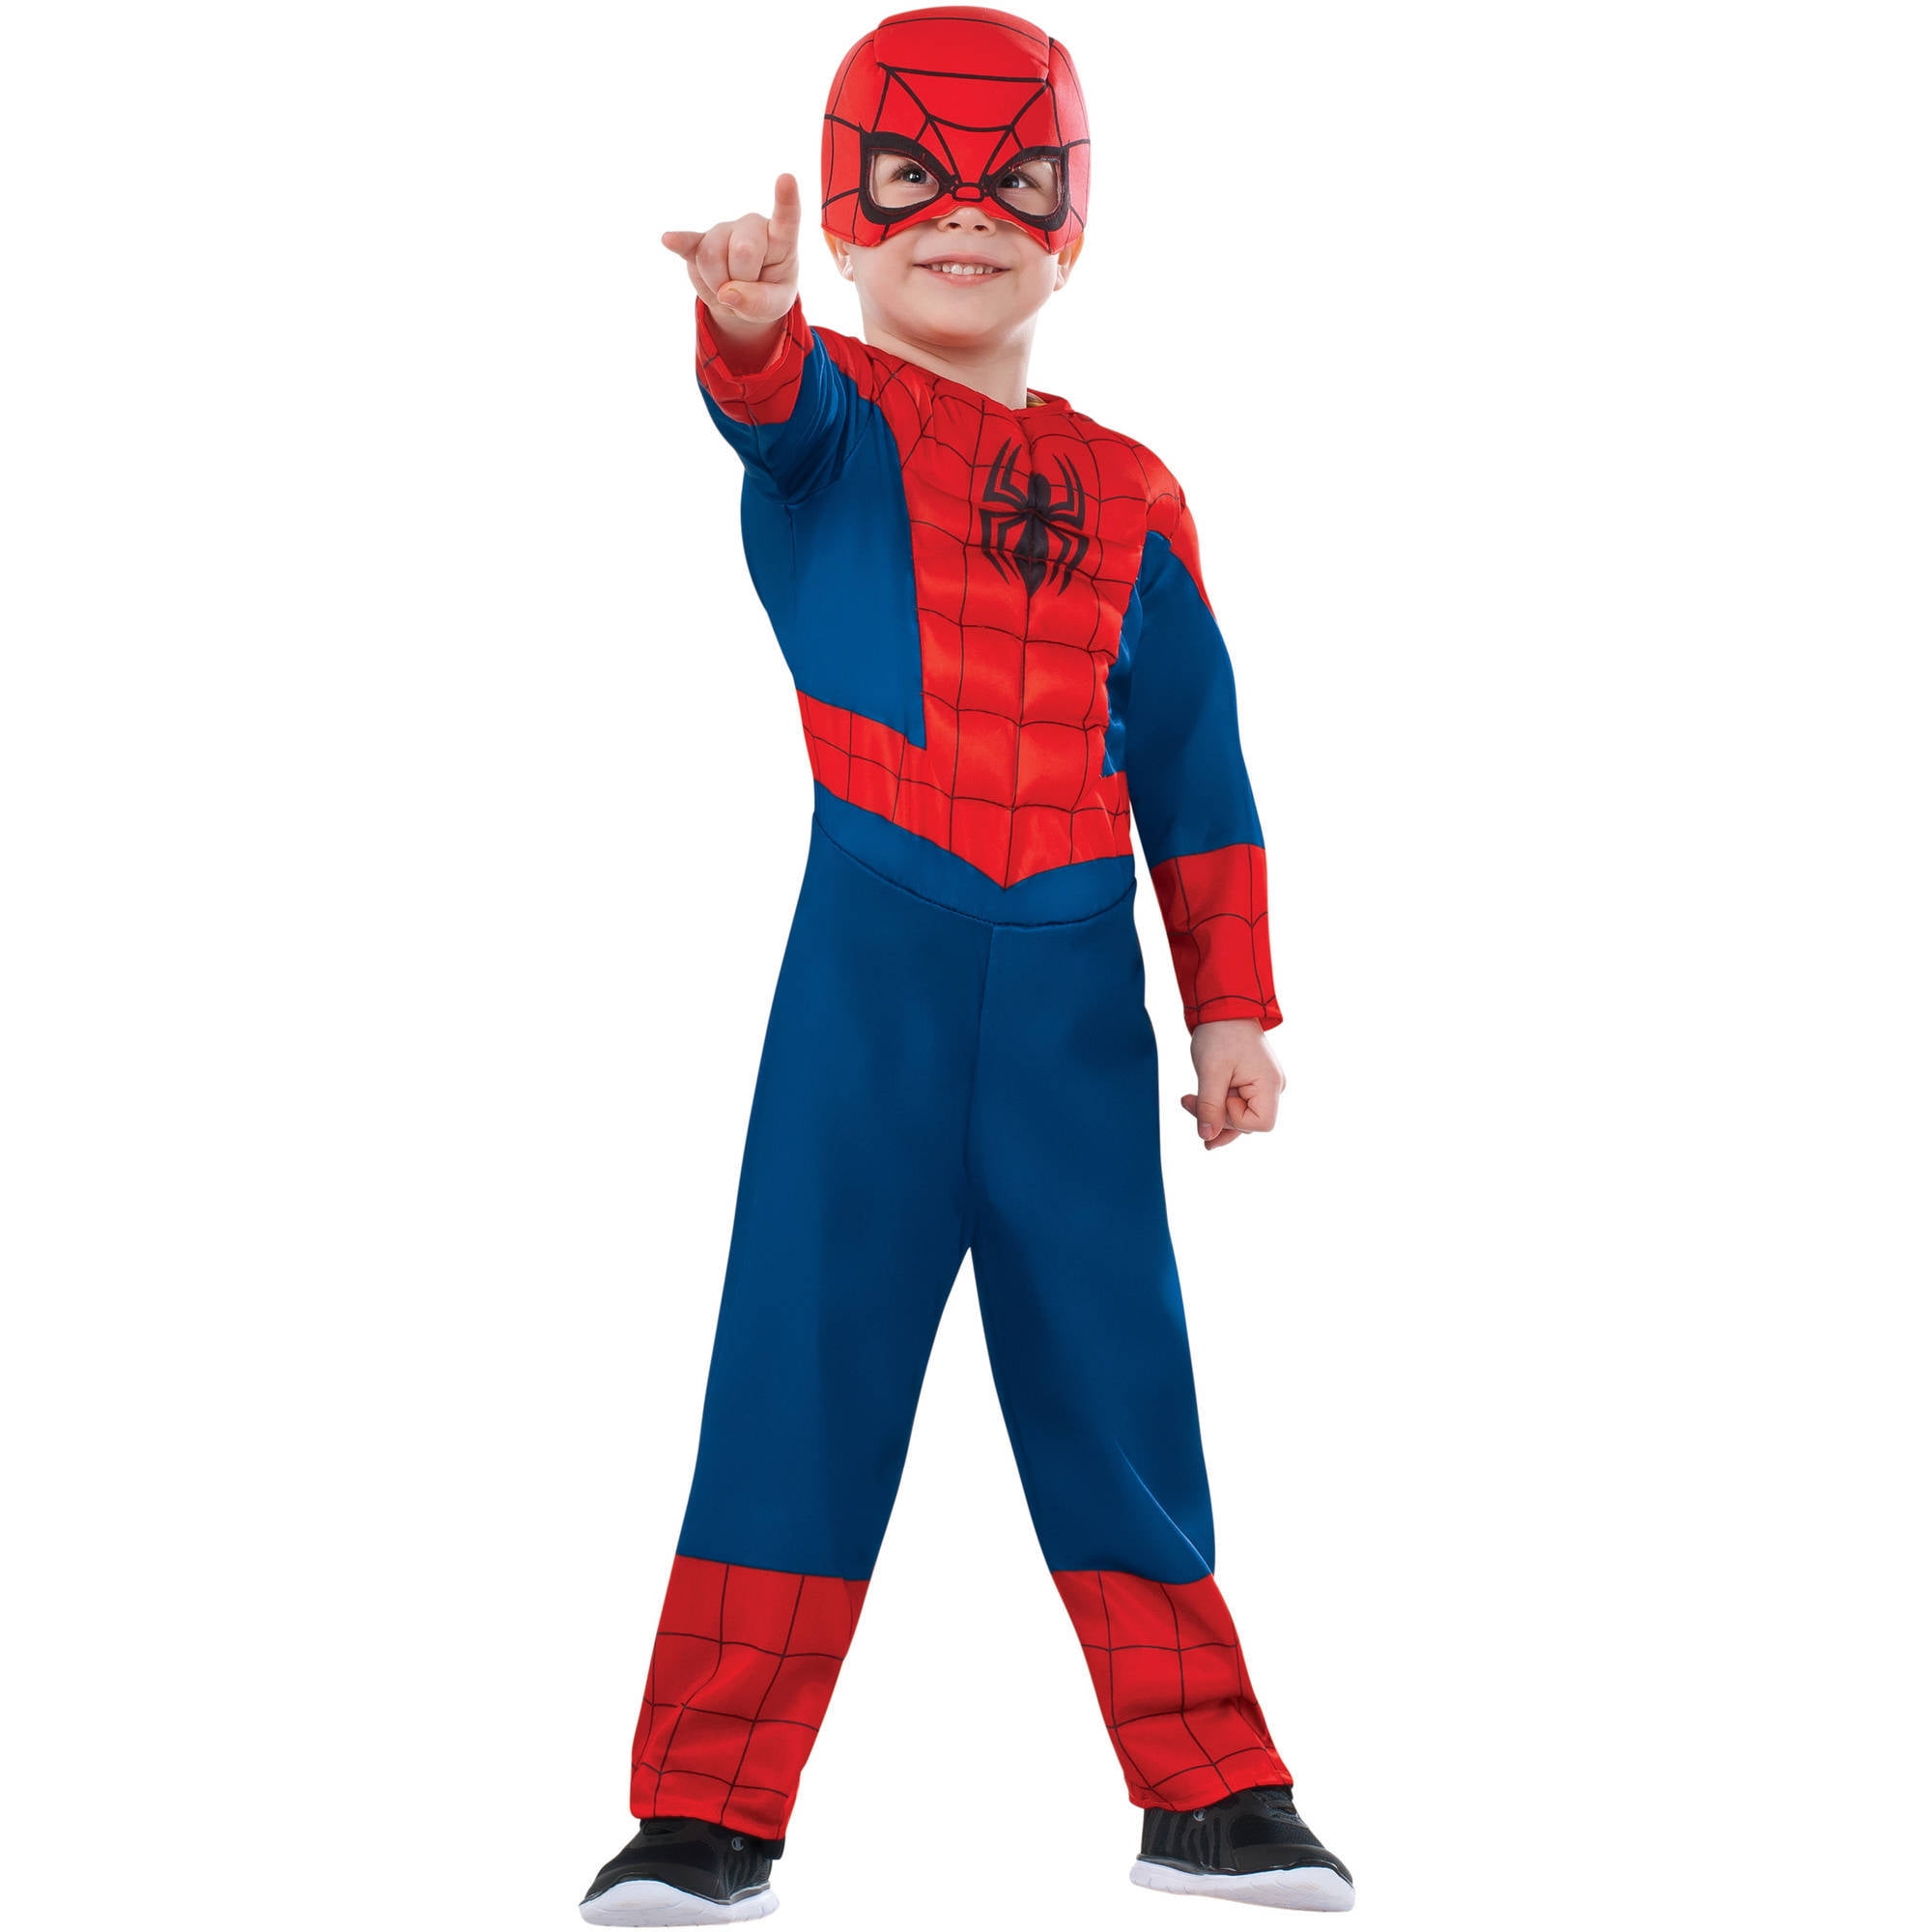 Rubies Costume Co Spiderman Muscle Chest Toddler Halloween Costume ...